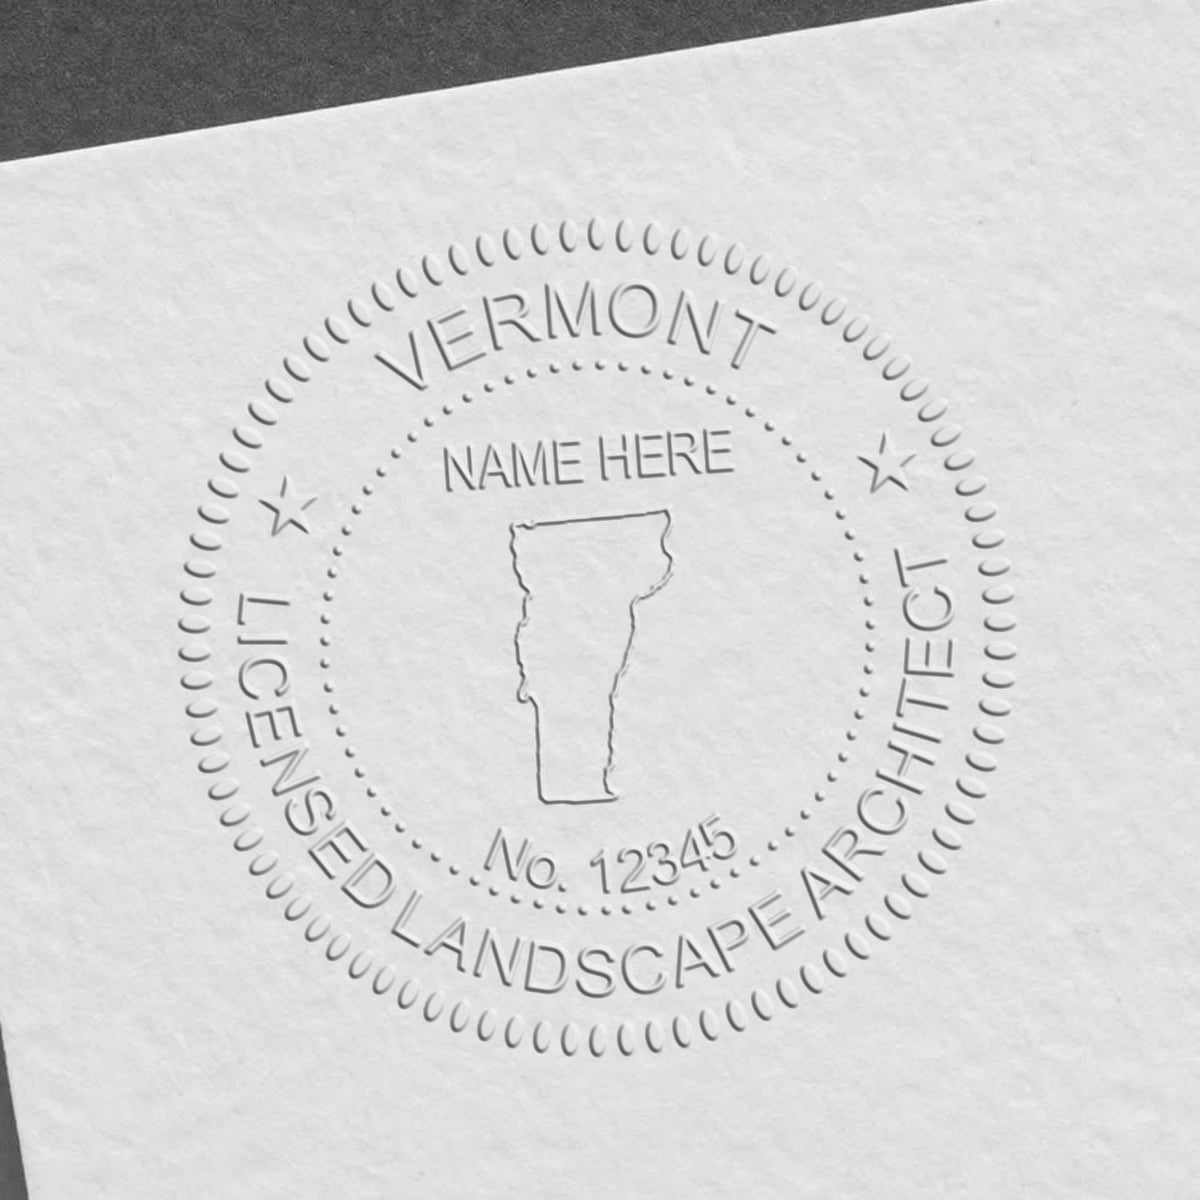 An in use photo of the Hybrid Vermont Landscape Architect Seal showing a sample imprint on a cardstock